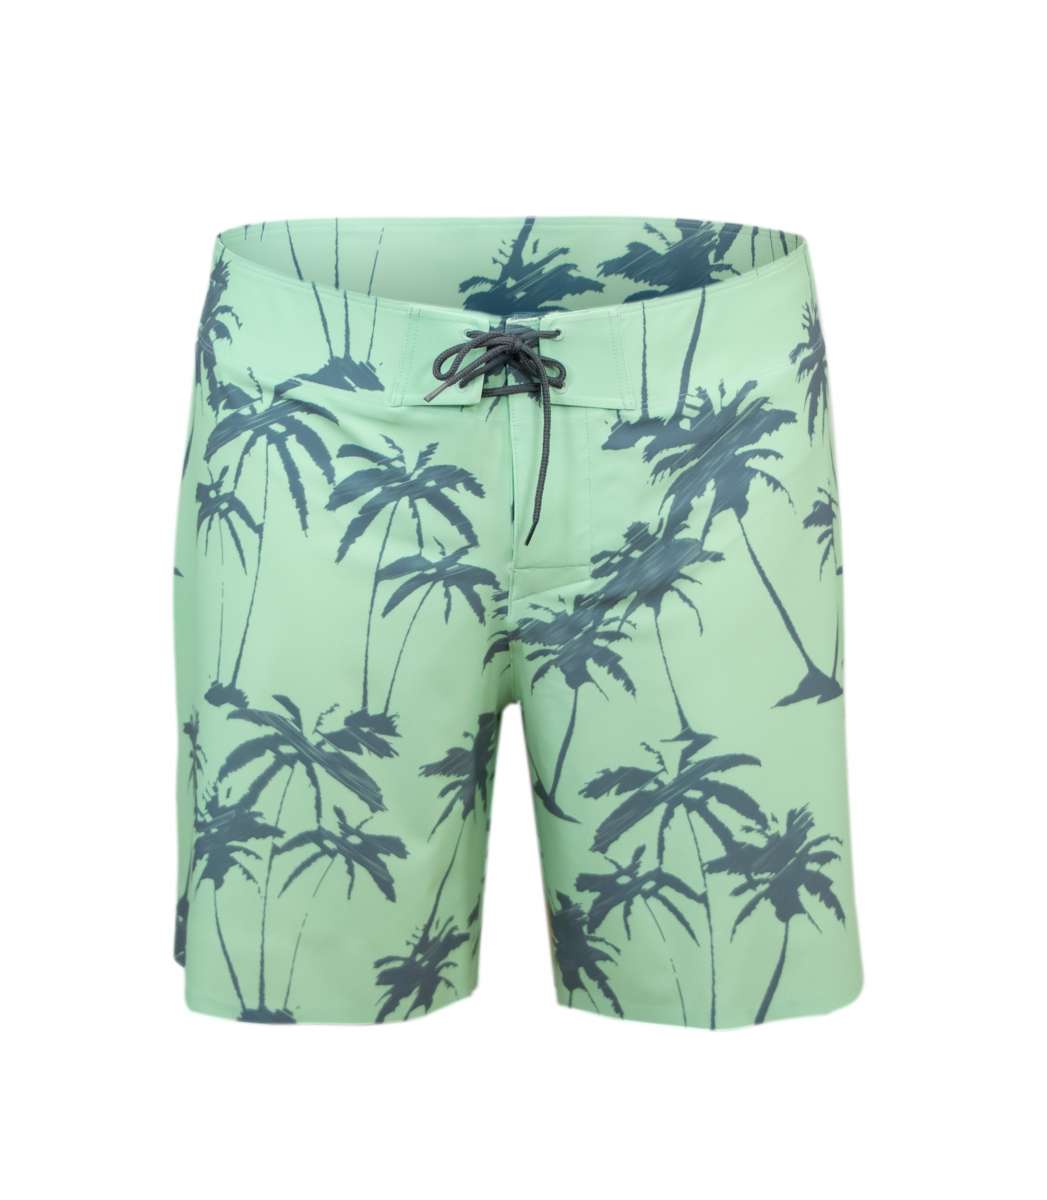 UV Boardshorts 'pag palms' front view 